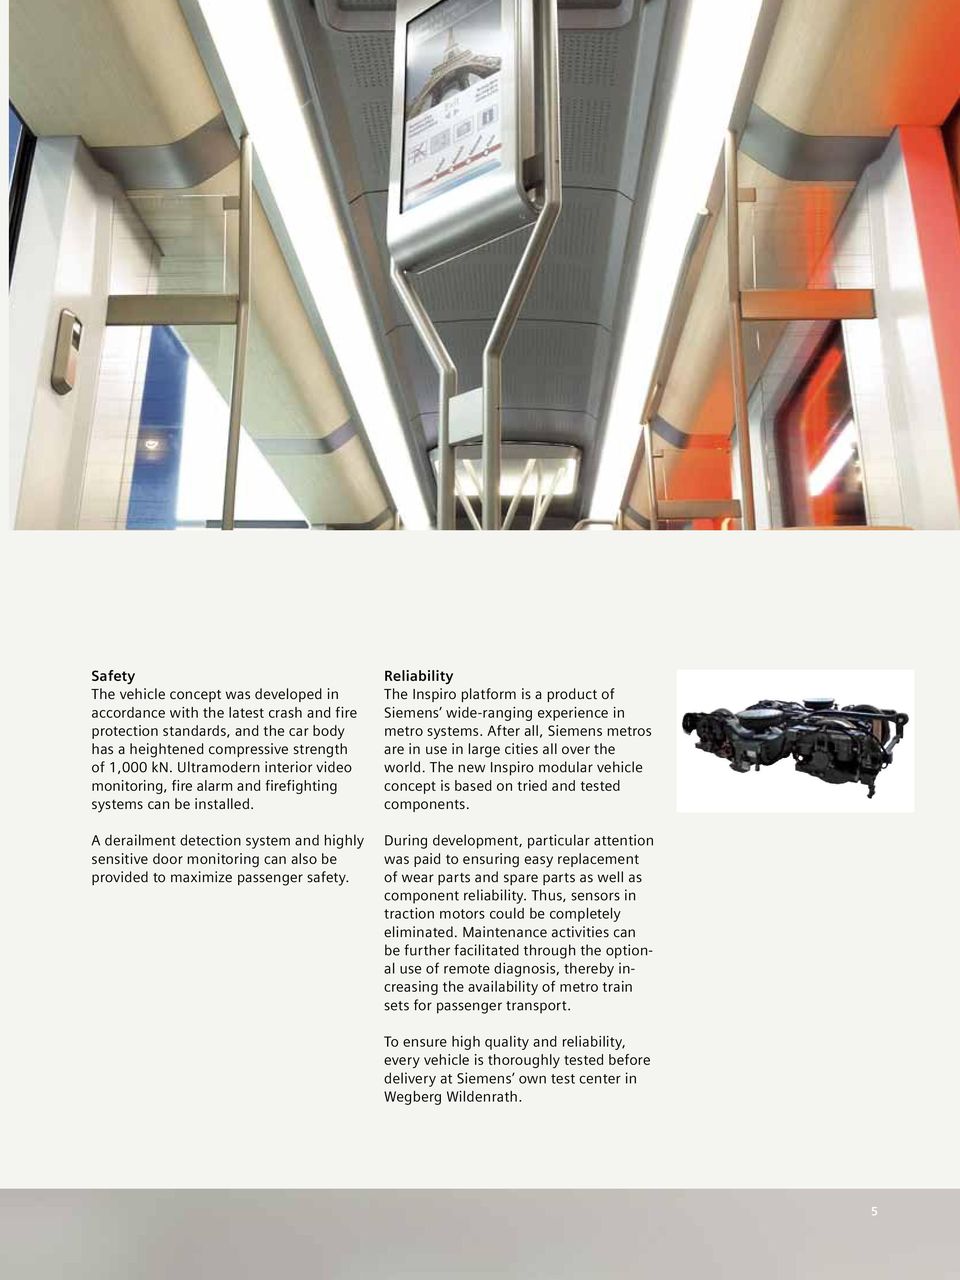 A derailment detection system and highly sensitive door monitoring can also be provided to maximize passenger safety.